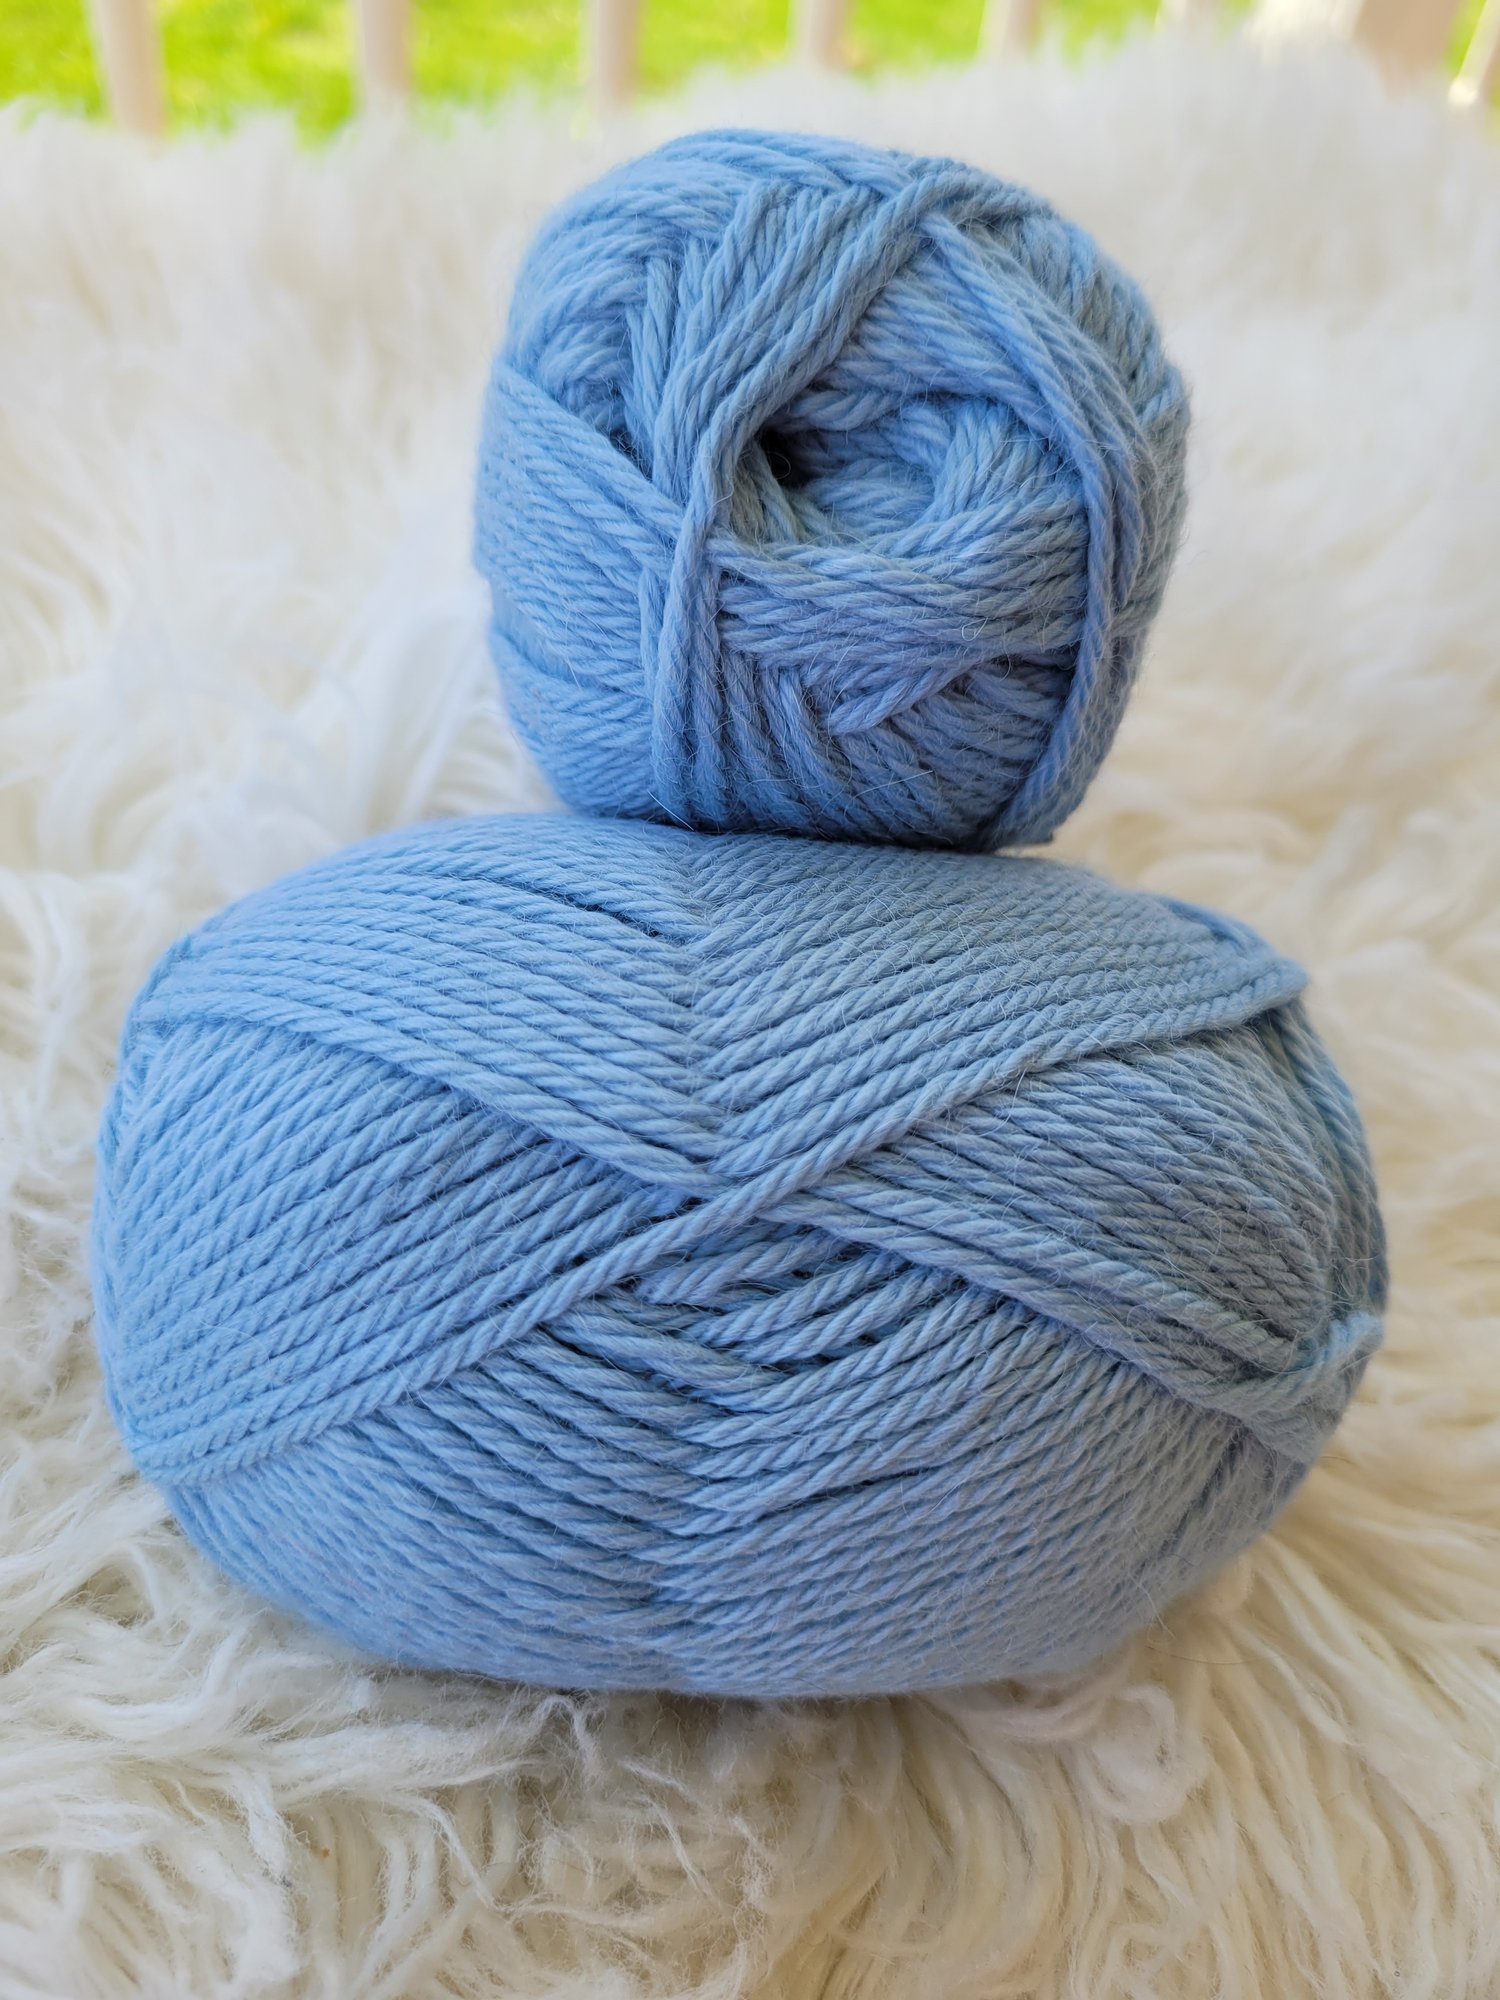 65% Wool and 35% Alpaca Yarn for Knitting and Crocheting, 3 or Light, Worsted, Dk Weight, Drops Lima, 1.8 oz 109 Yards per Ball (9016 Navy Blue)